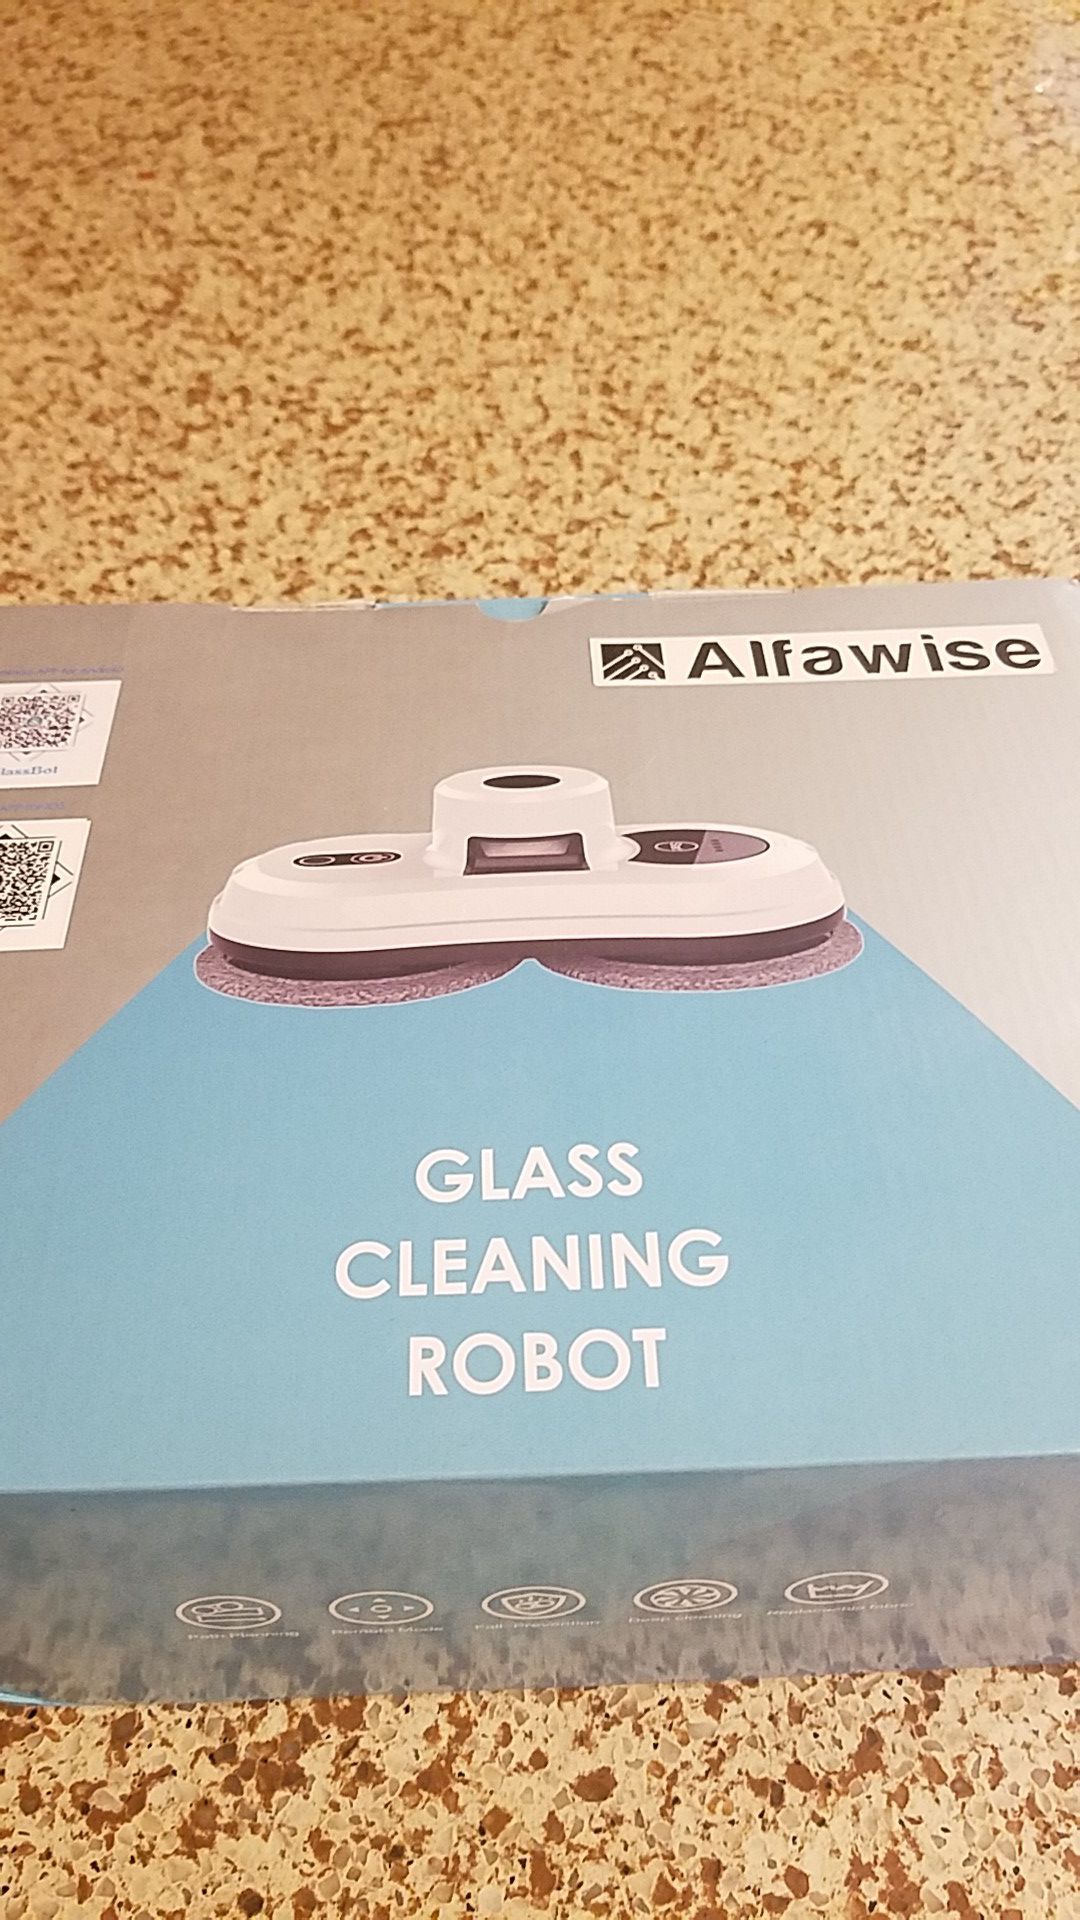 Alfawise Glass Cleaning Robot